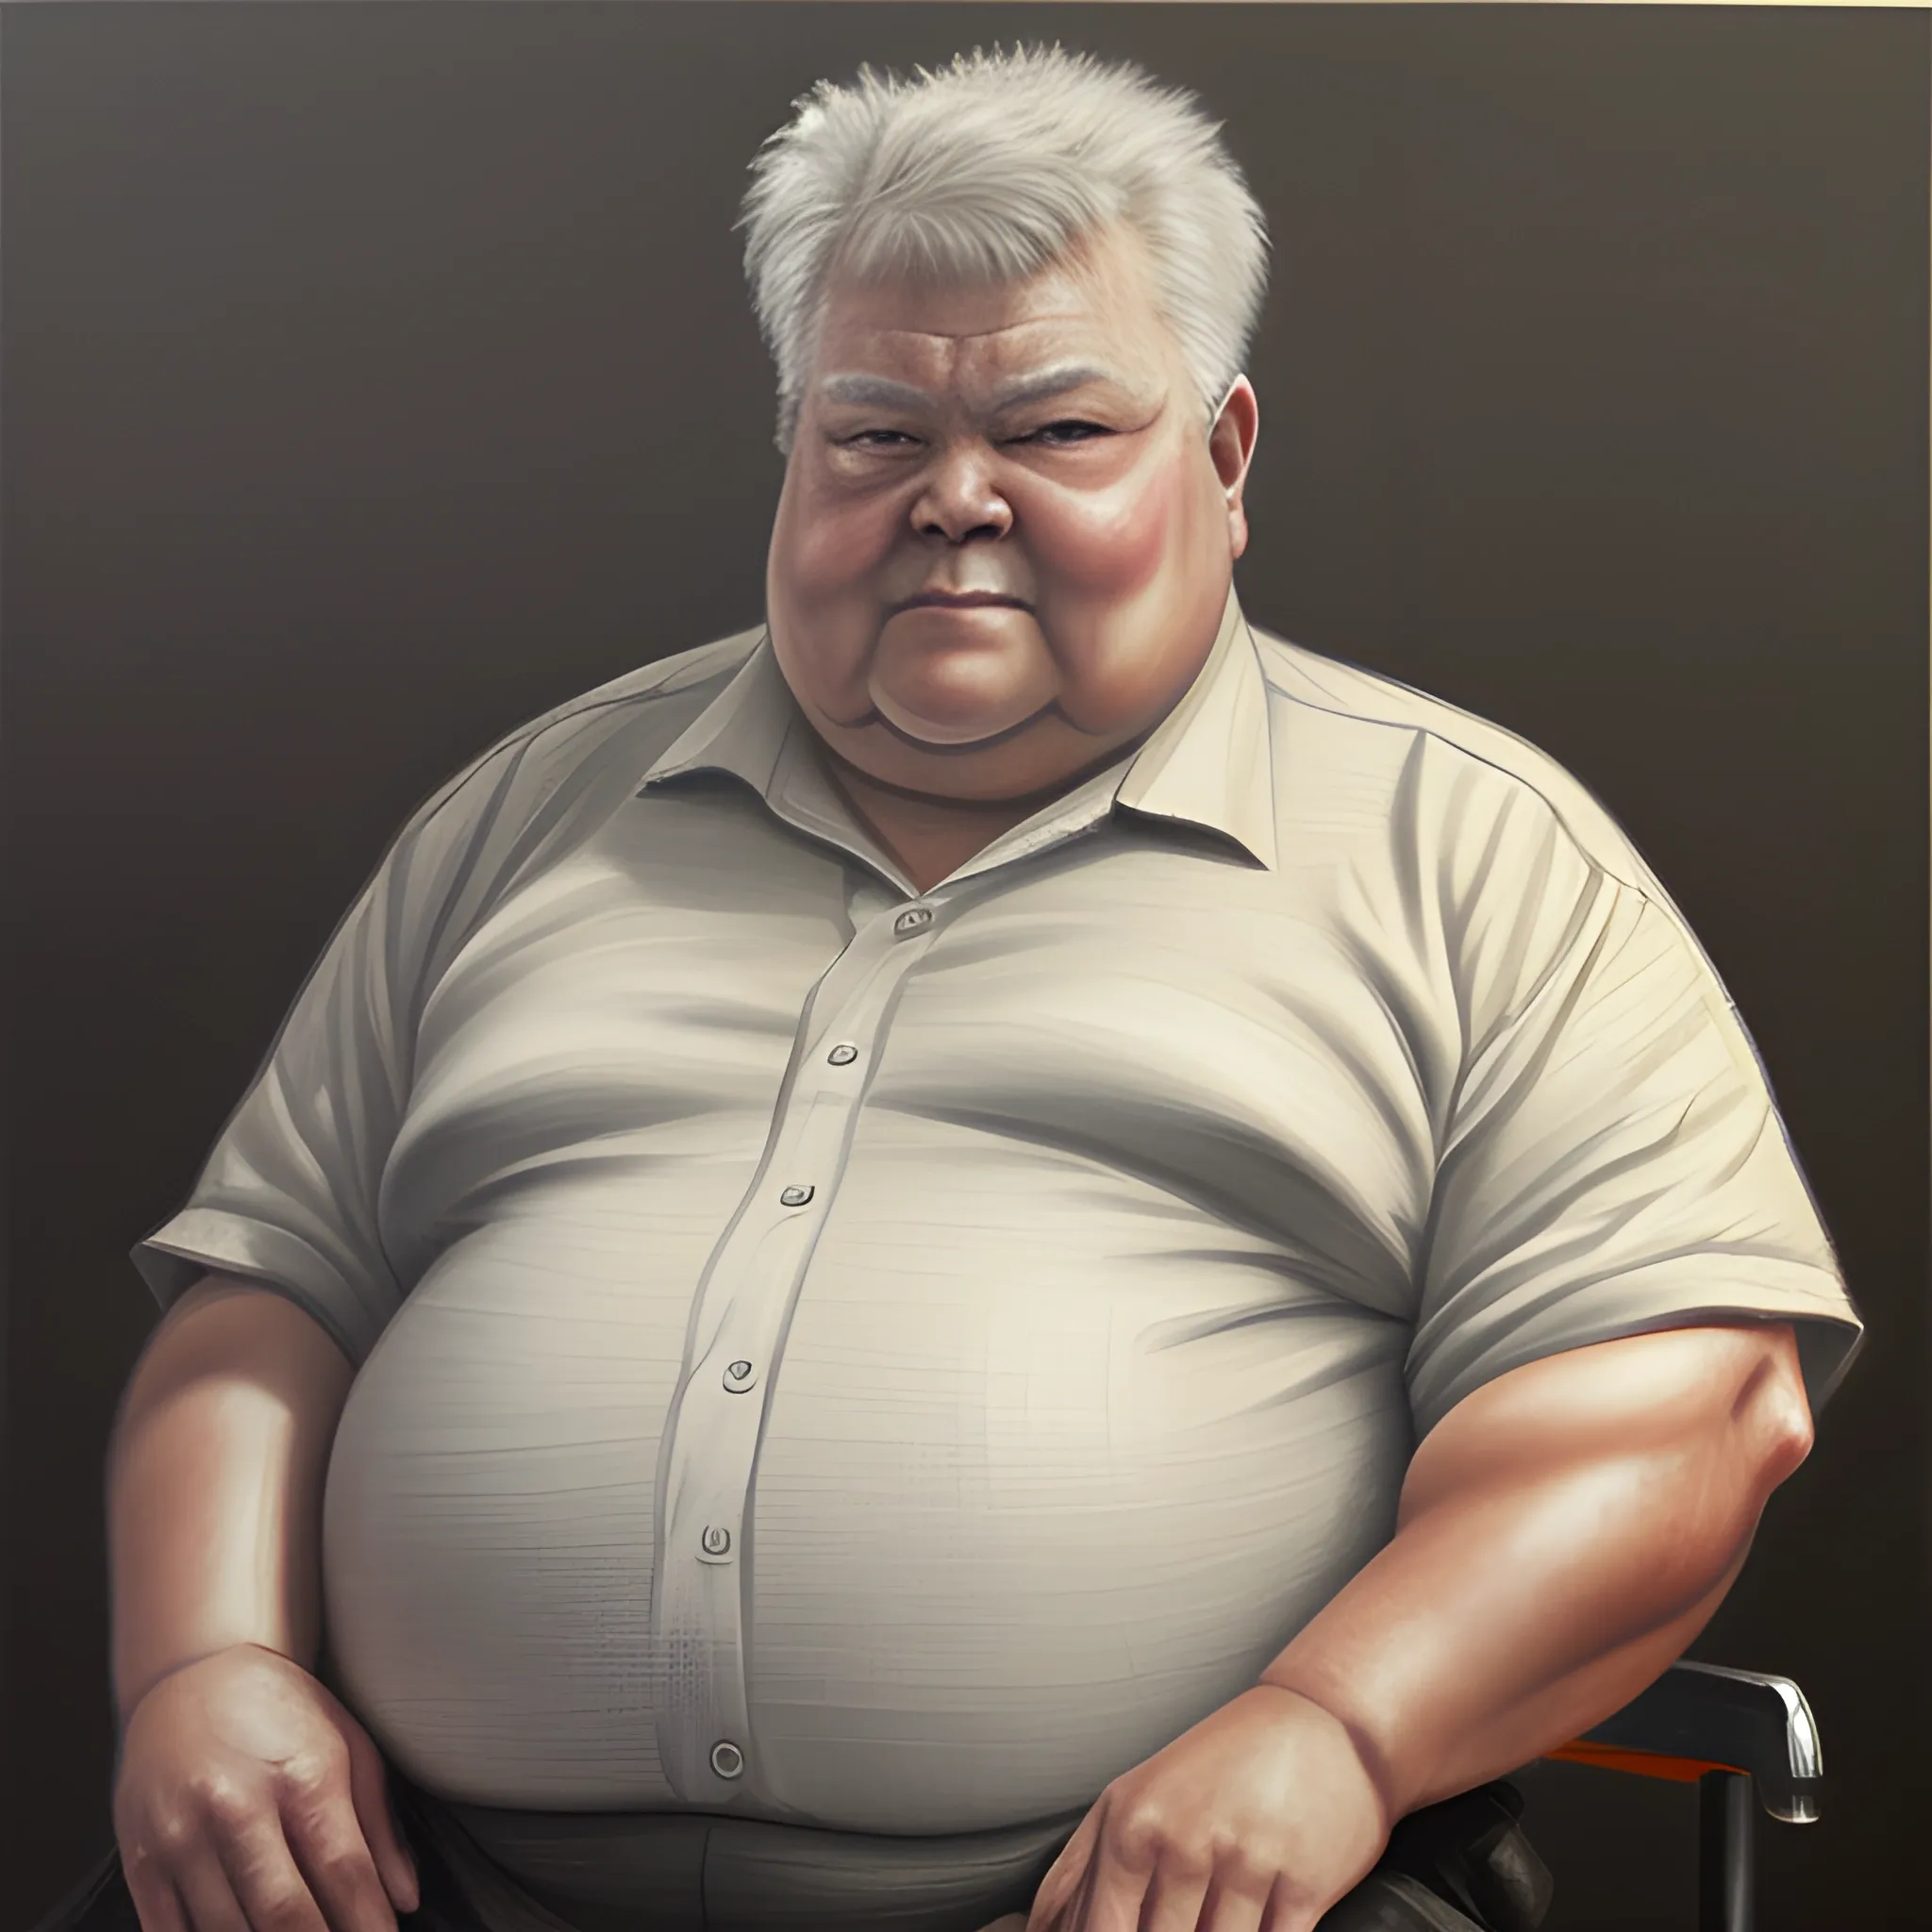 Man 70 years old fat, str8ct judge, Oil Painting, Pencil Sketch